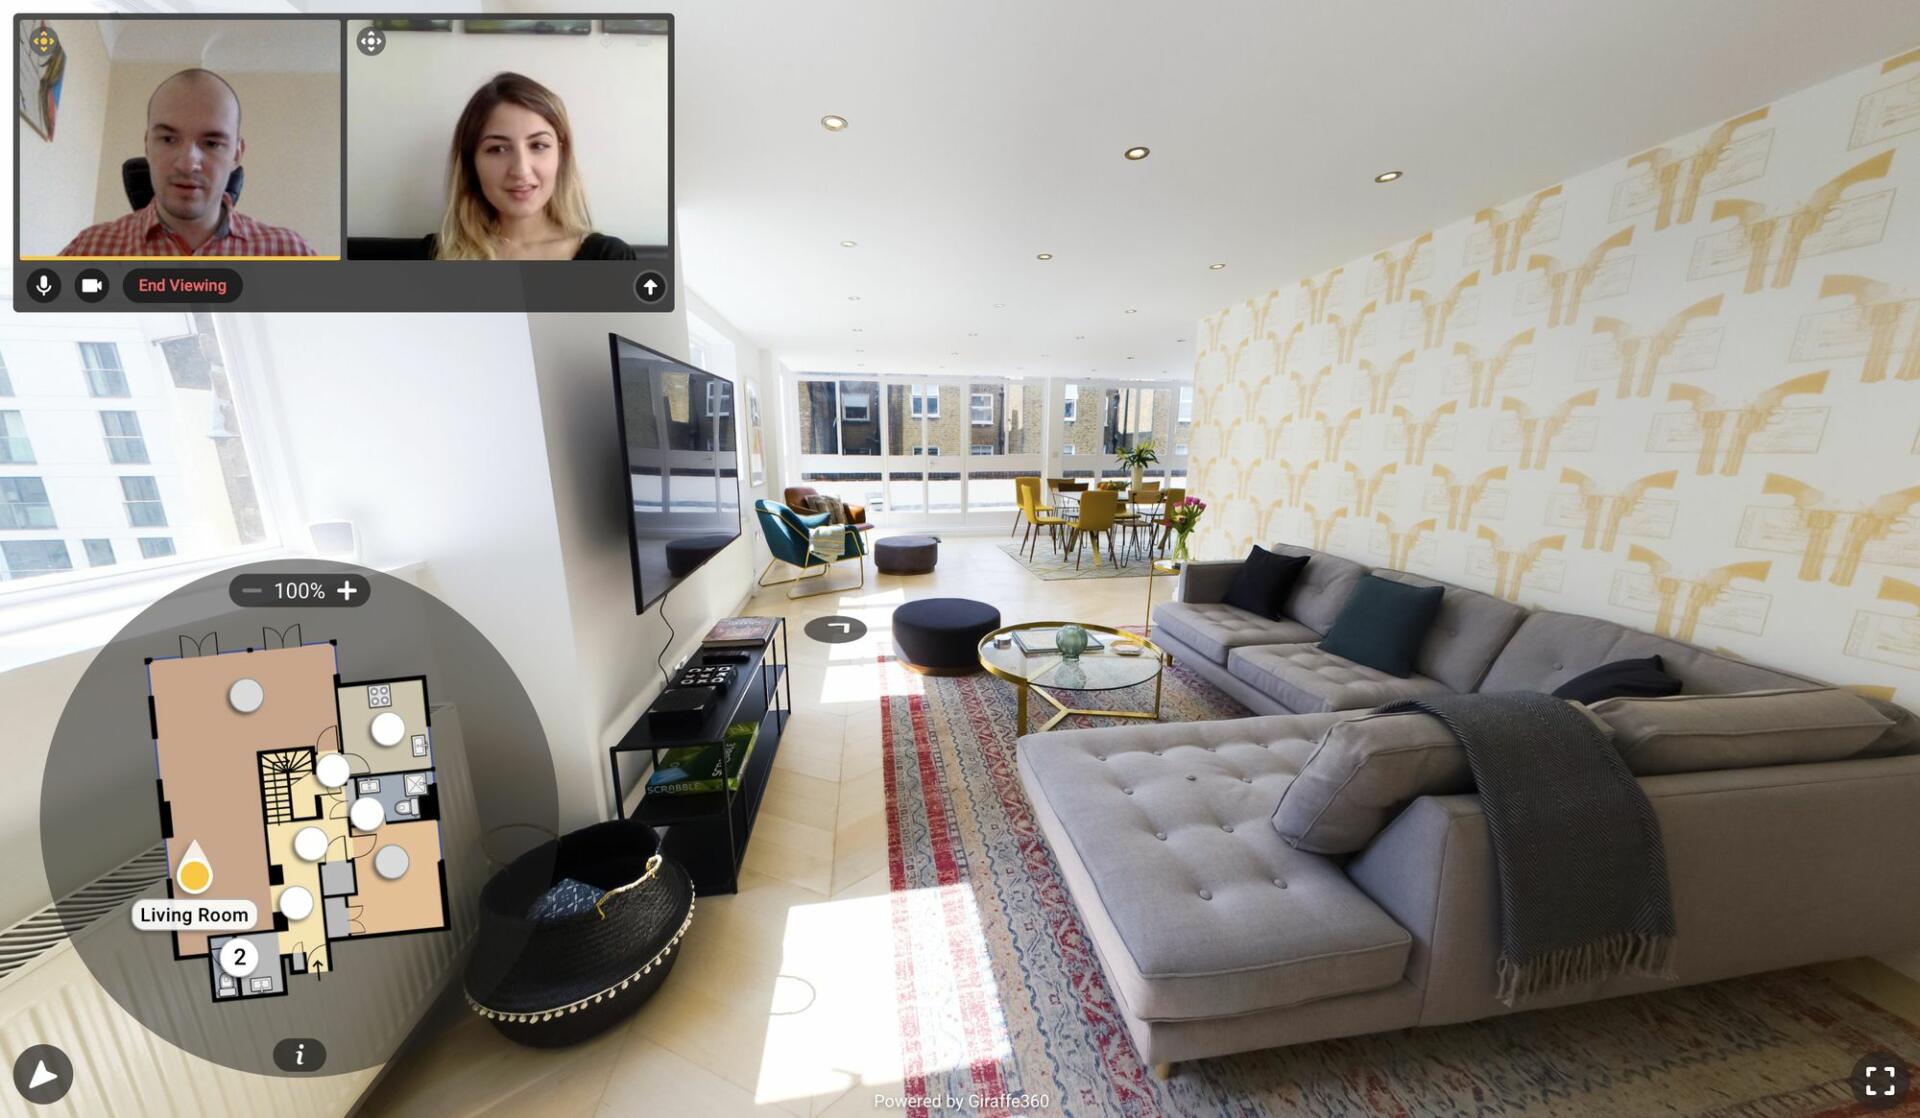 two people viewing a home remotely through video call